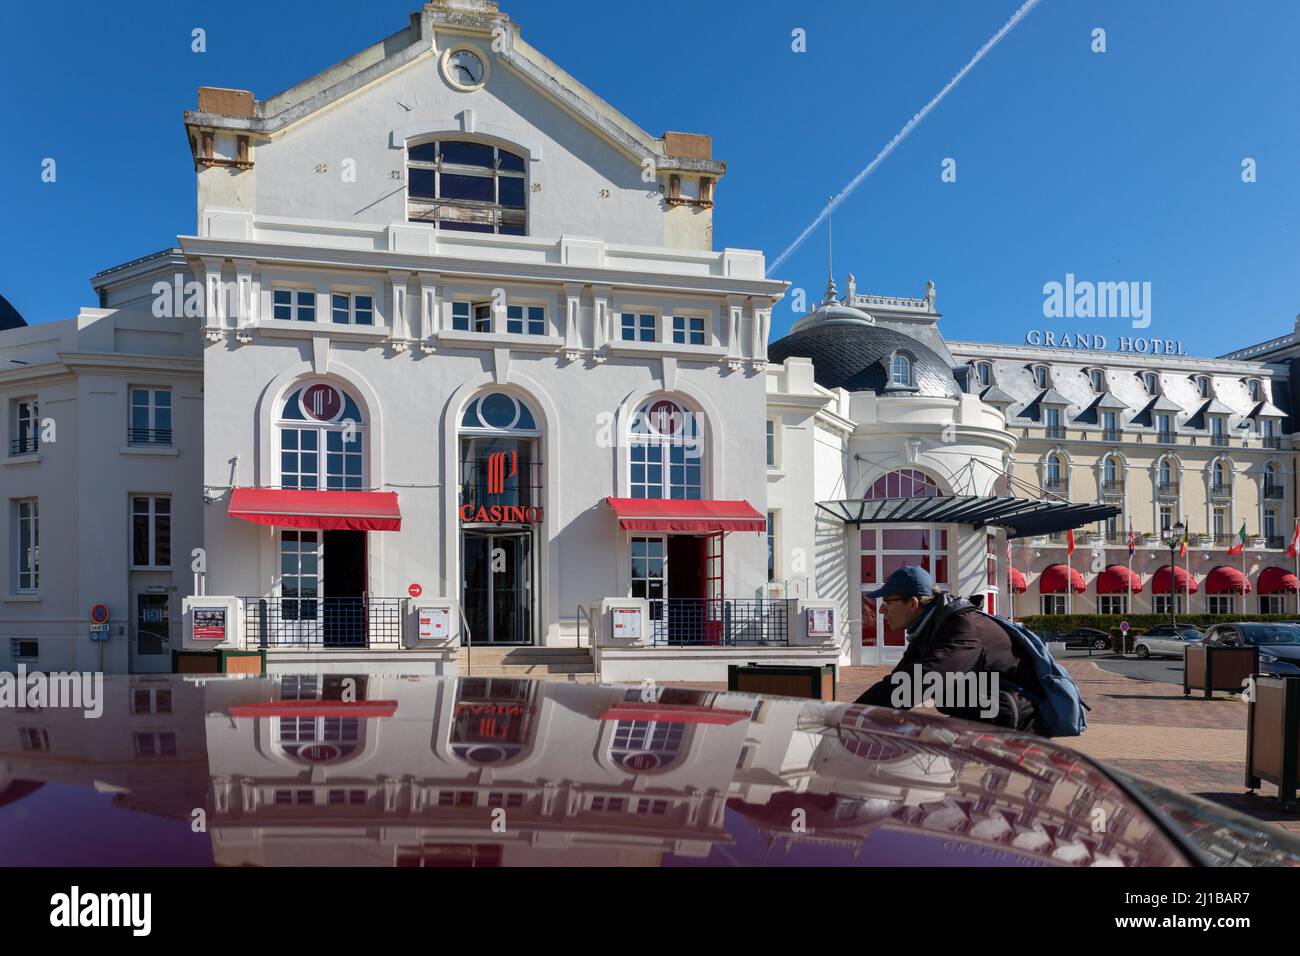 ENTRANCE TO THE CASINO IN FONT OF THE GRAND HOTEL, CABOURG, CALVADOS, NORMANDY, FRANCE Stock Photo